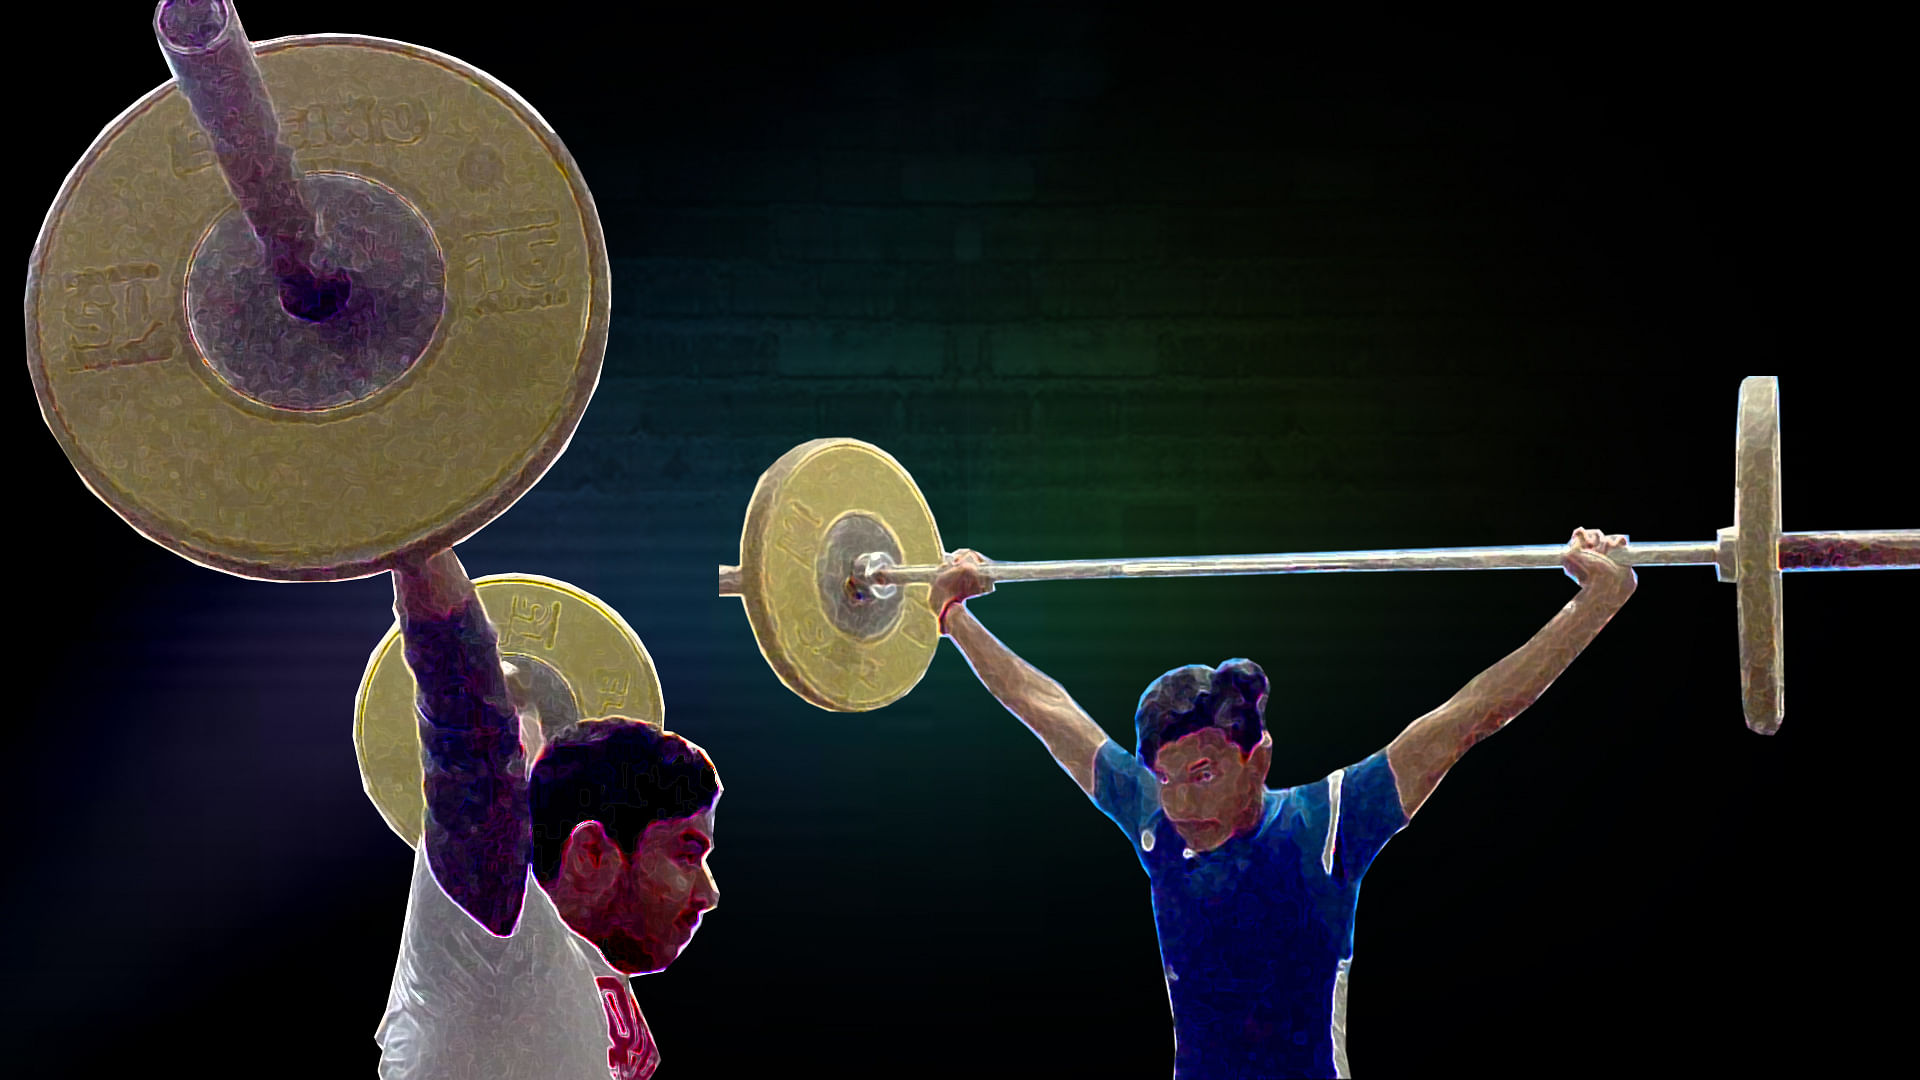 The weightlifters said they would like to address the problems of drugs and corruption plaguing Punjab. (Photo: <b>The Quint</b>)